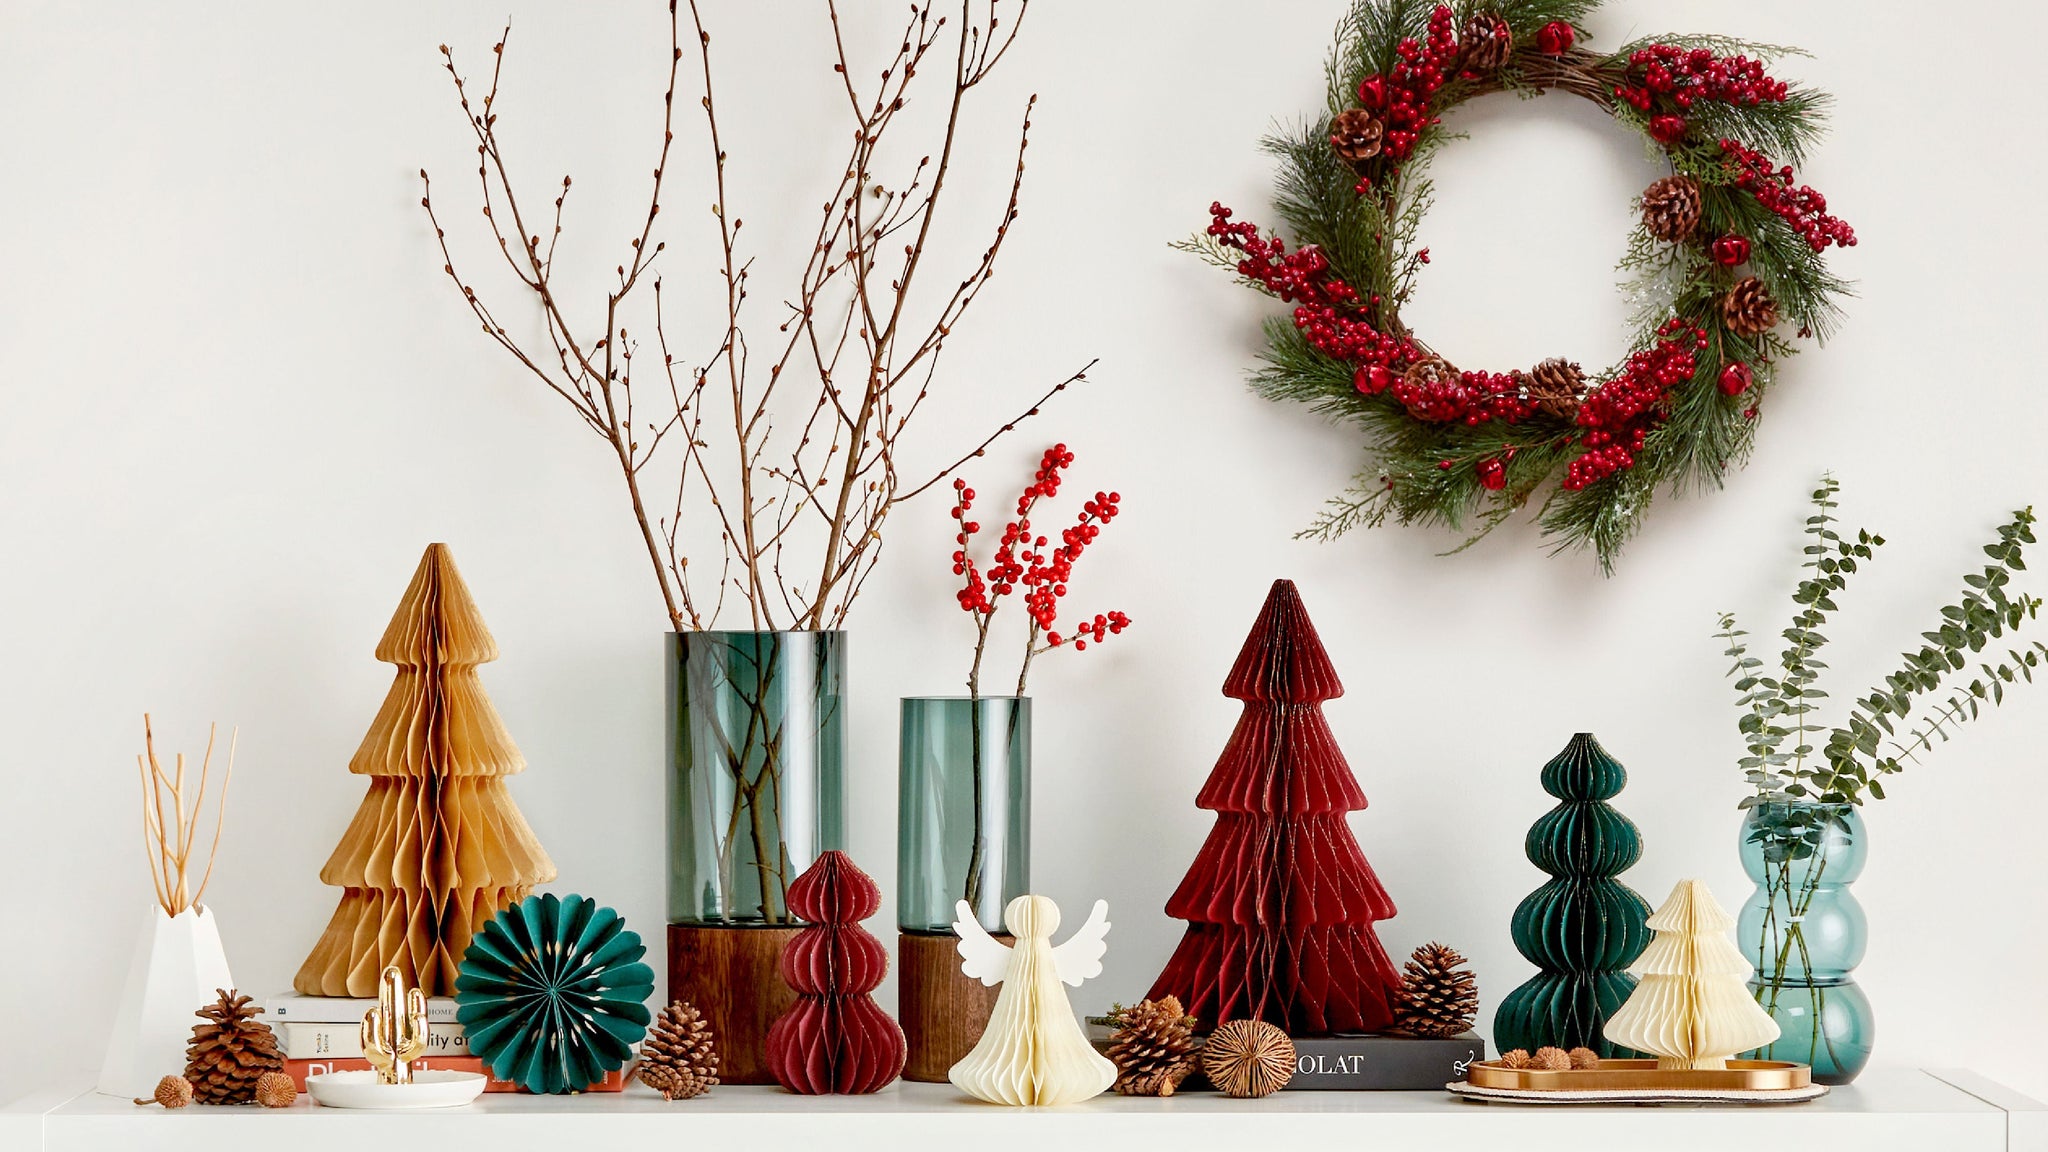 CHRISTMAS DECORATION IDEAS WITH PAPER ORNAMENTS